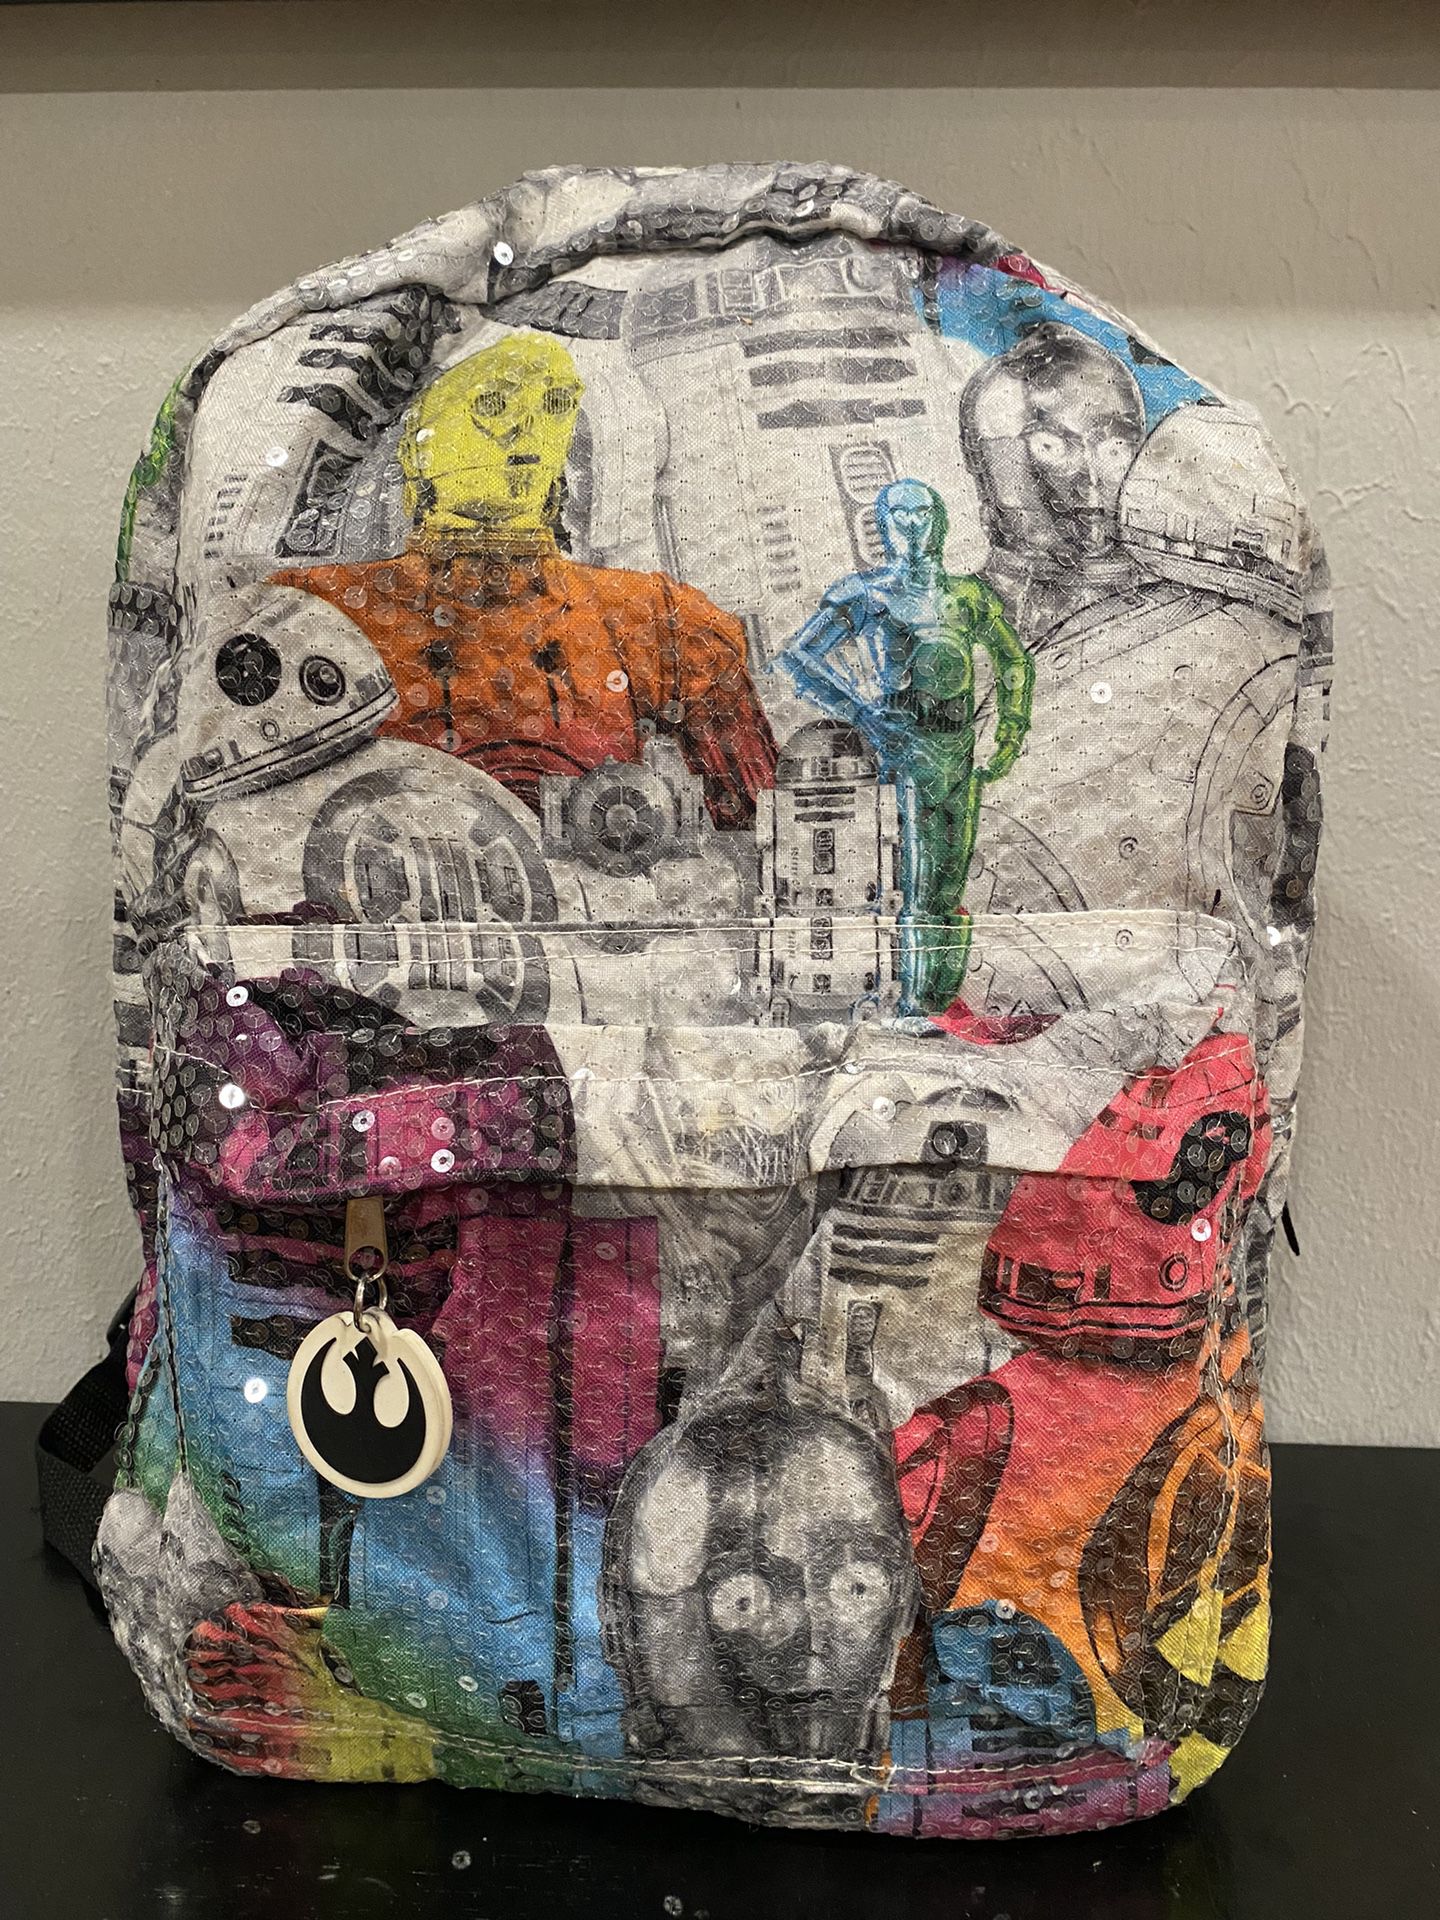 Star Wars C-3PO & R2-D2 Print Multi-Color with Clear Sequins Top Zip Backpack